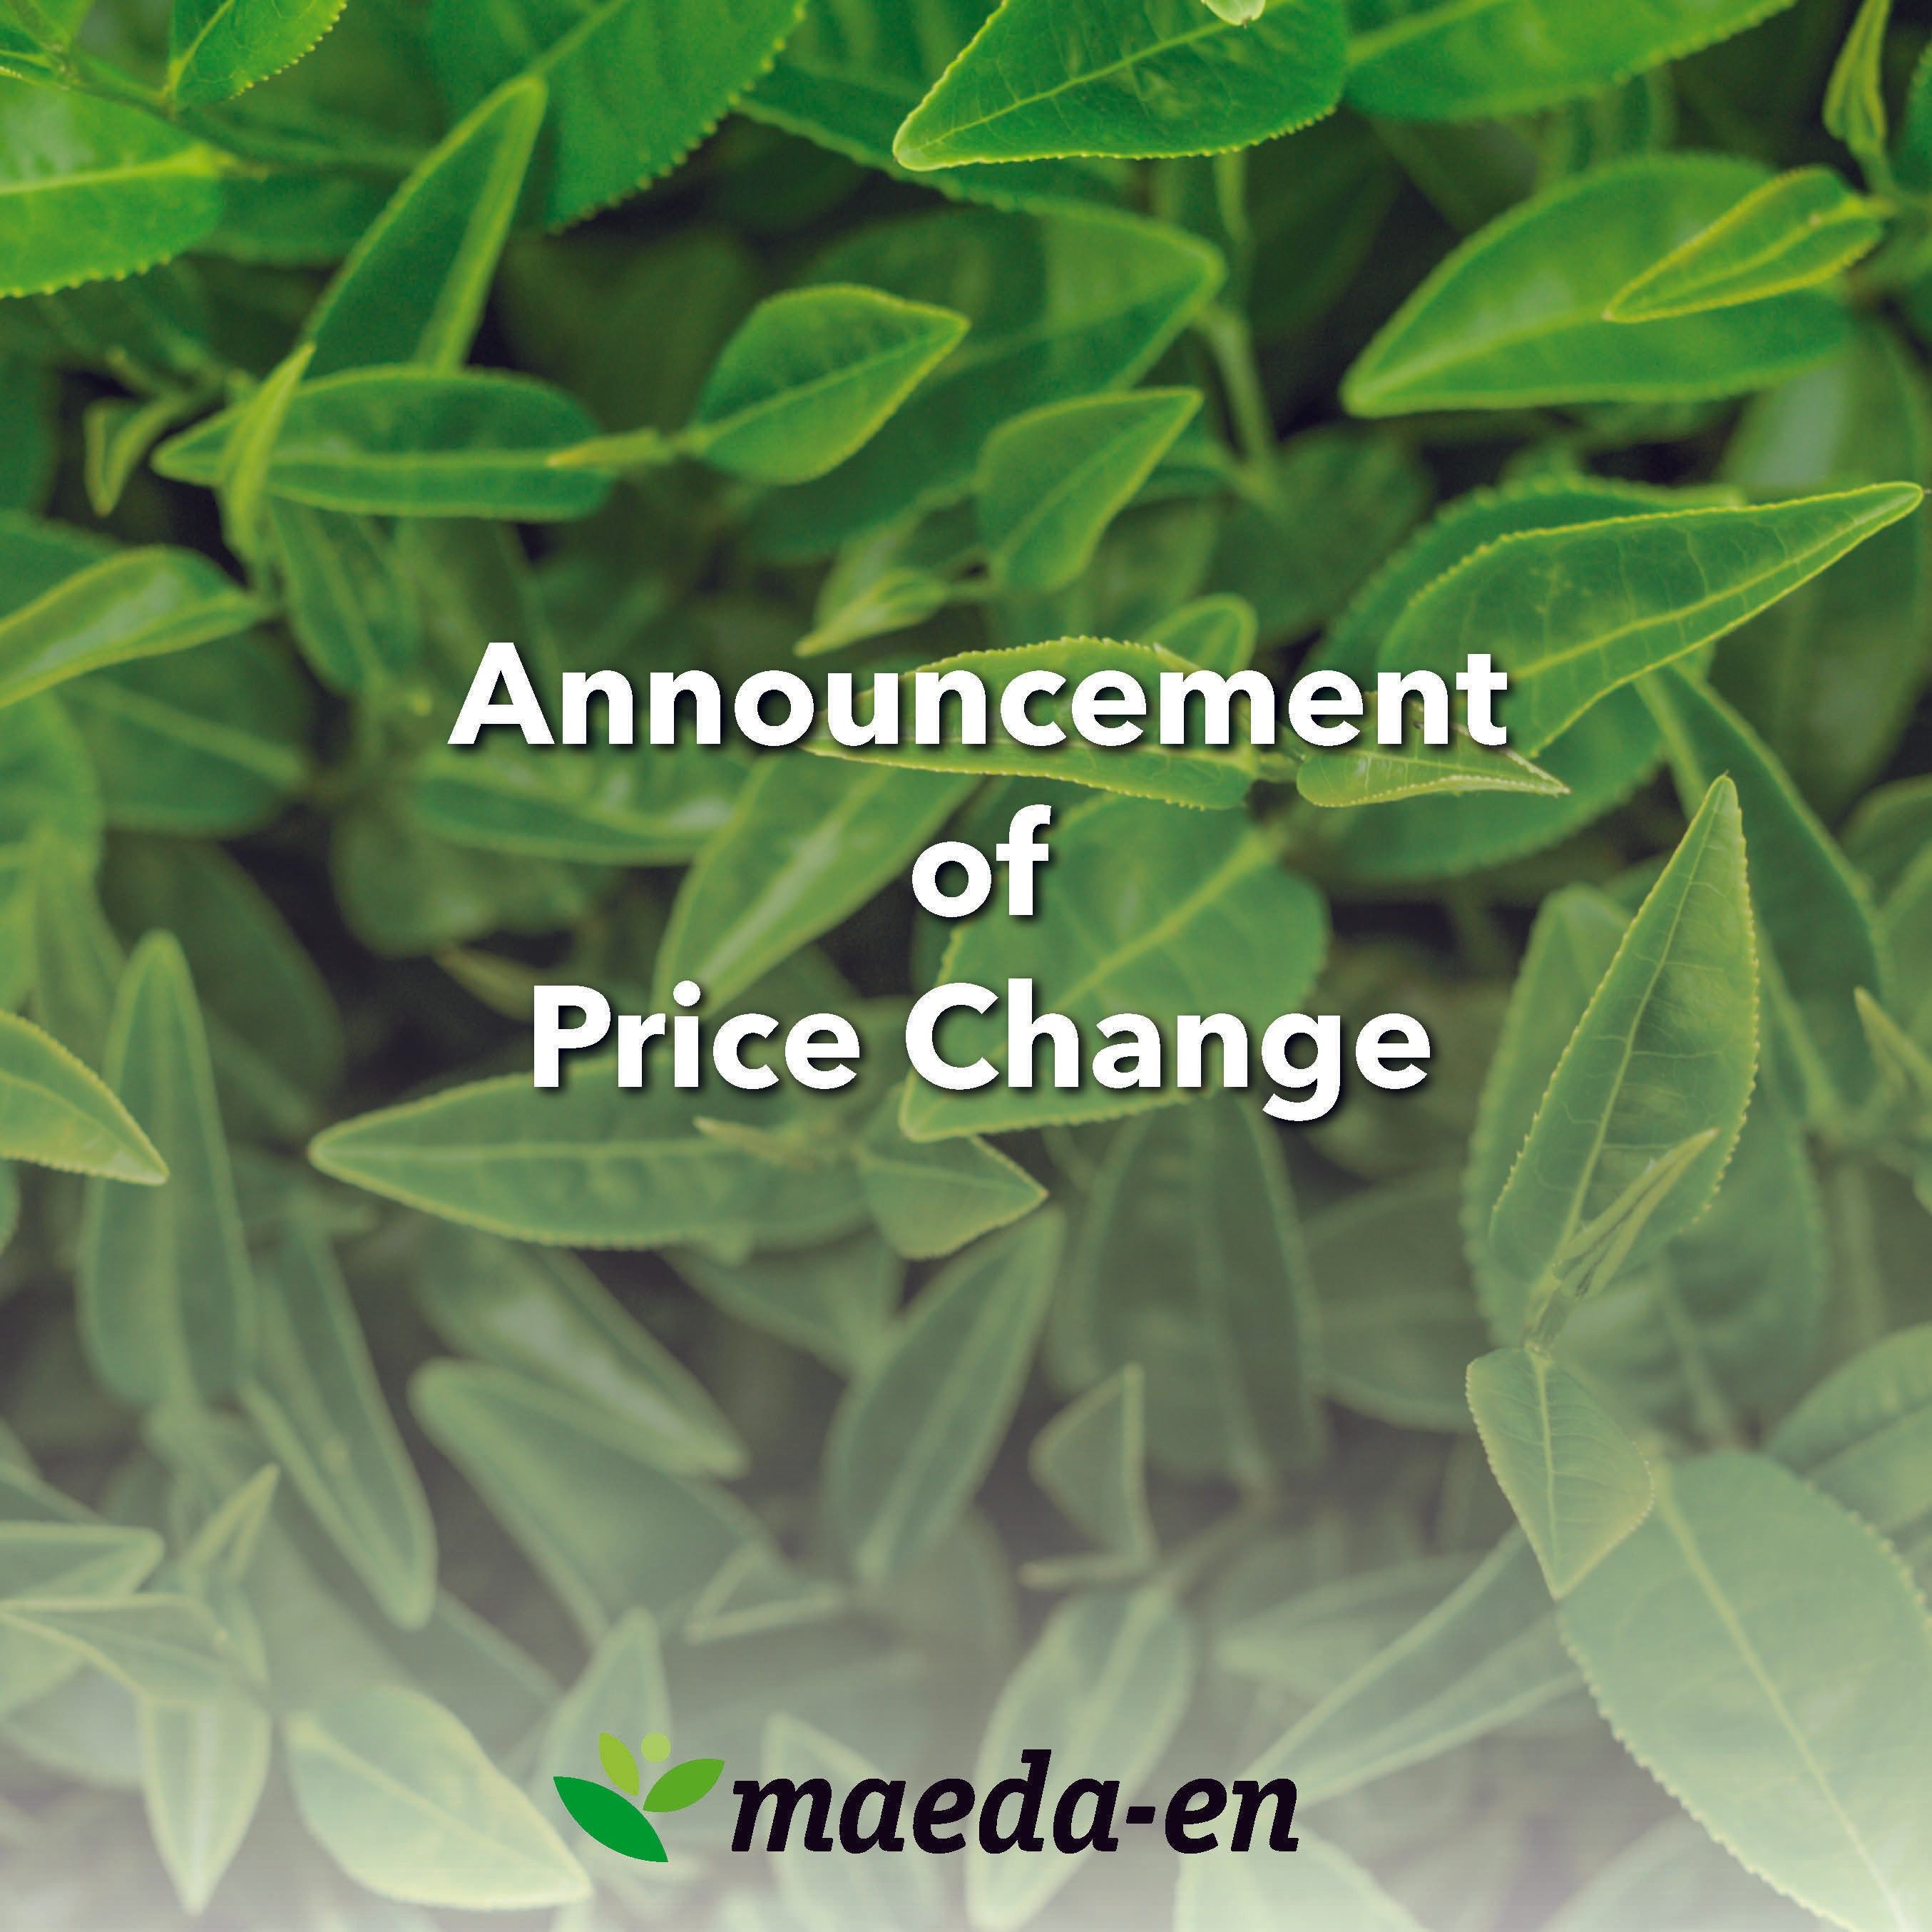 Announcement of Price Change